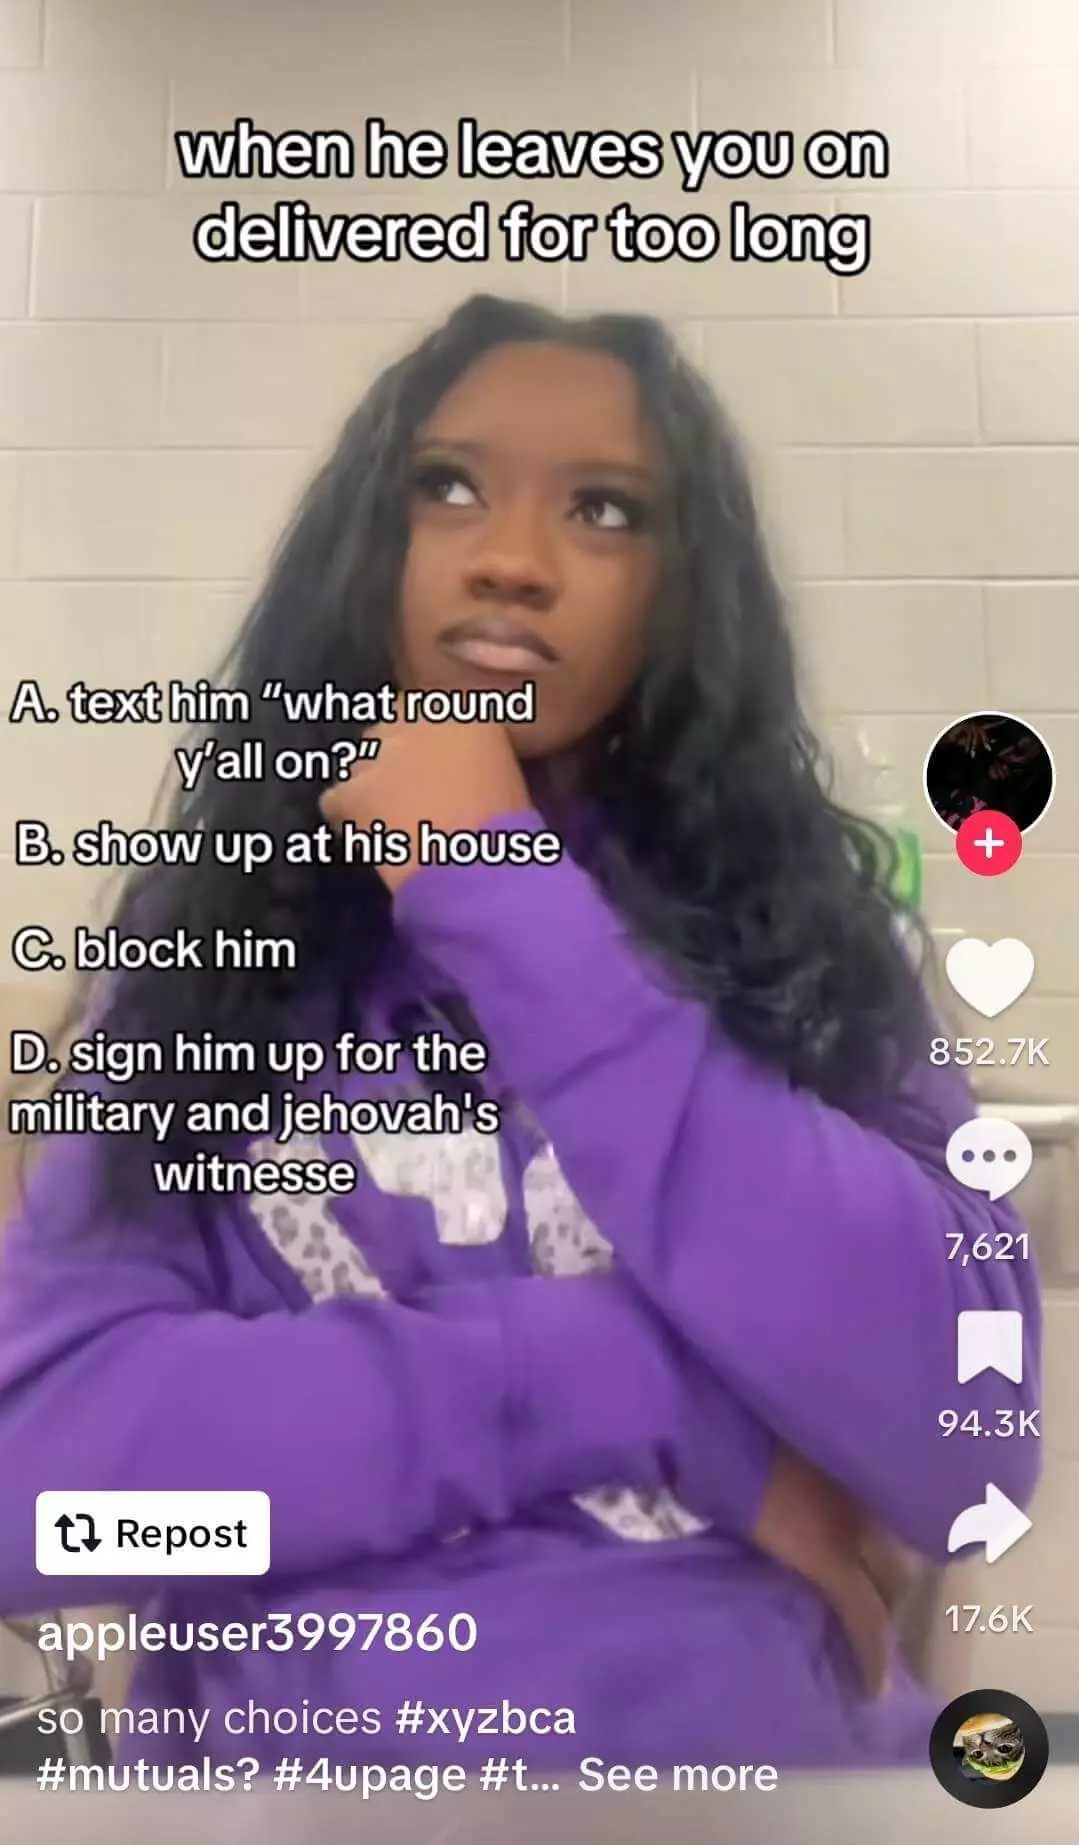 TikTok of a young woman thinking about what to do next with the caption "when he leaves you on delivered for too long" and four multiple choice options.